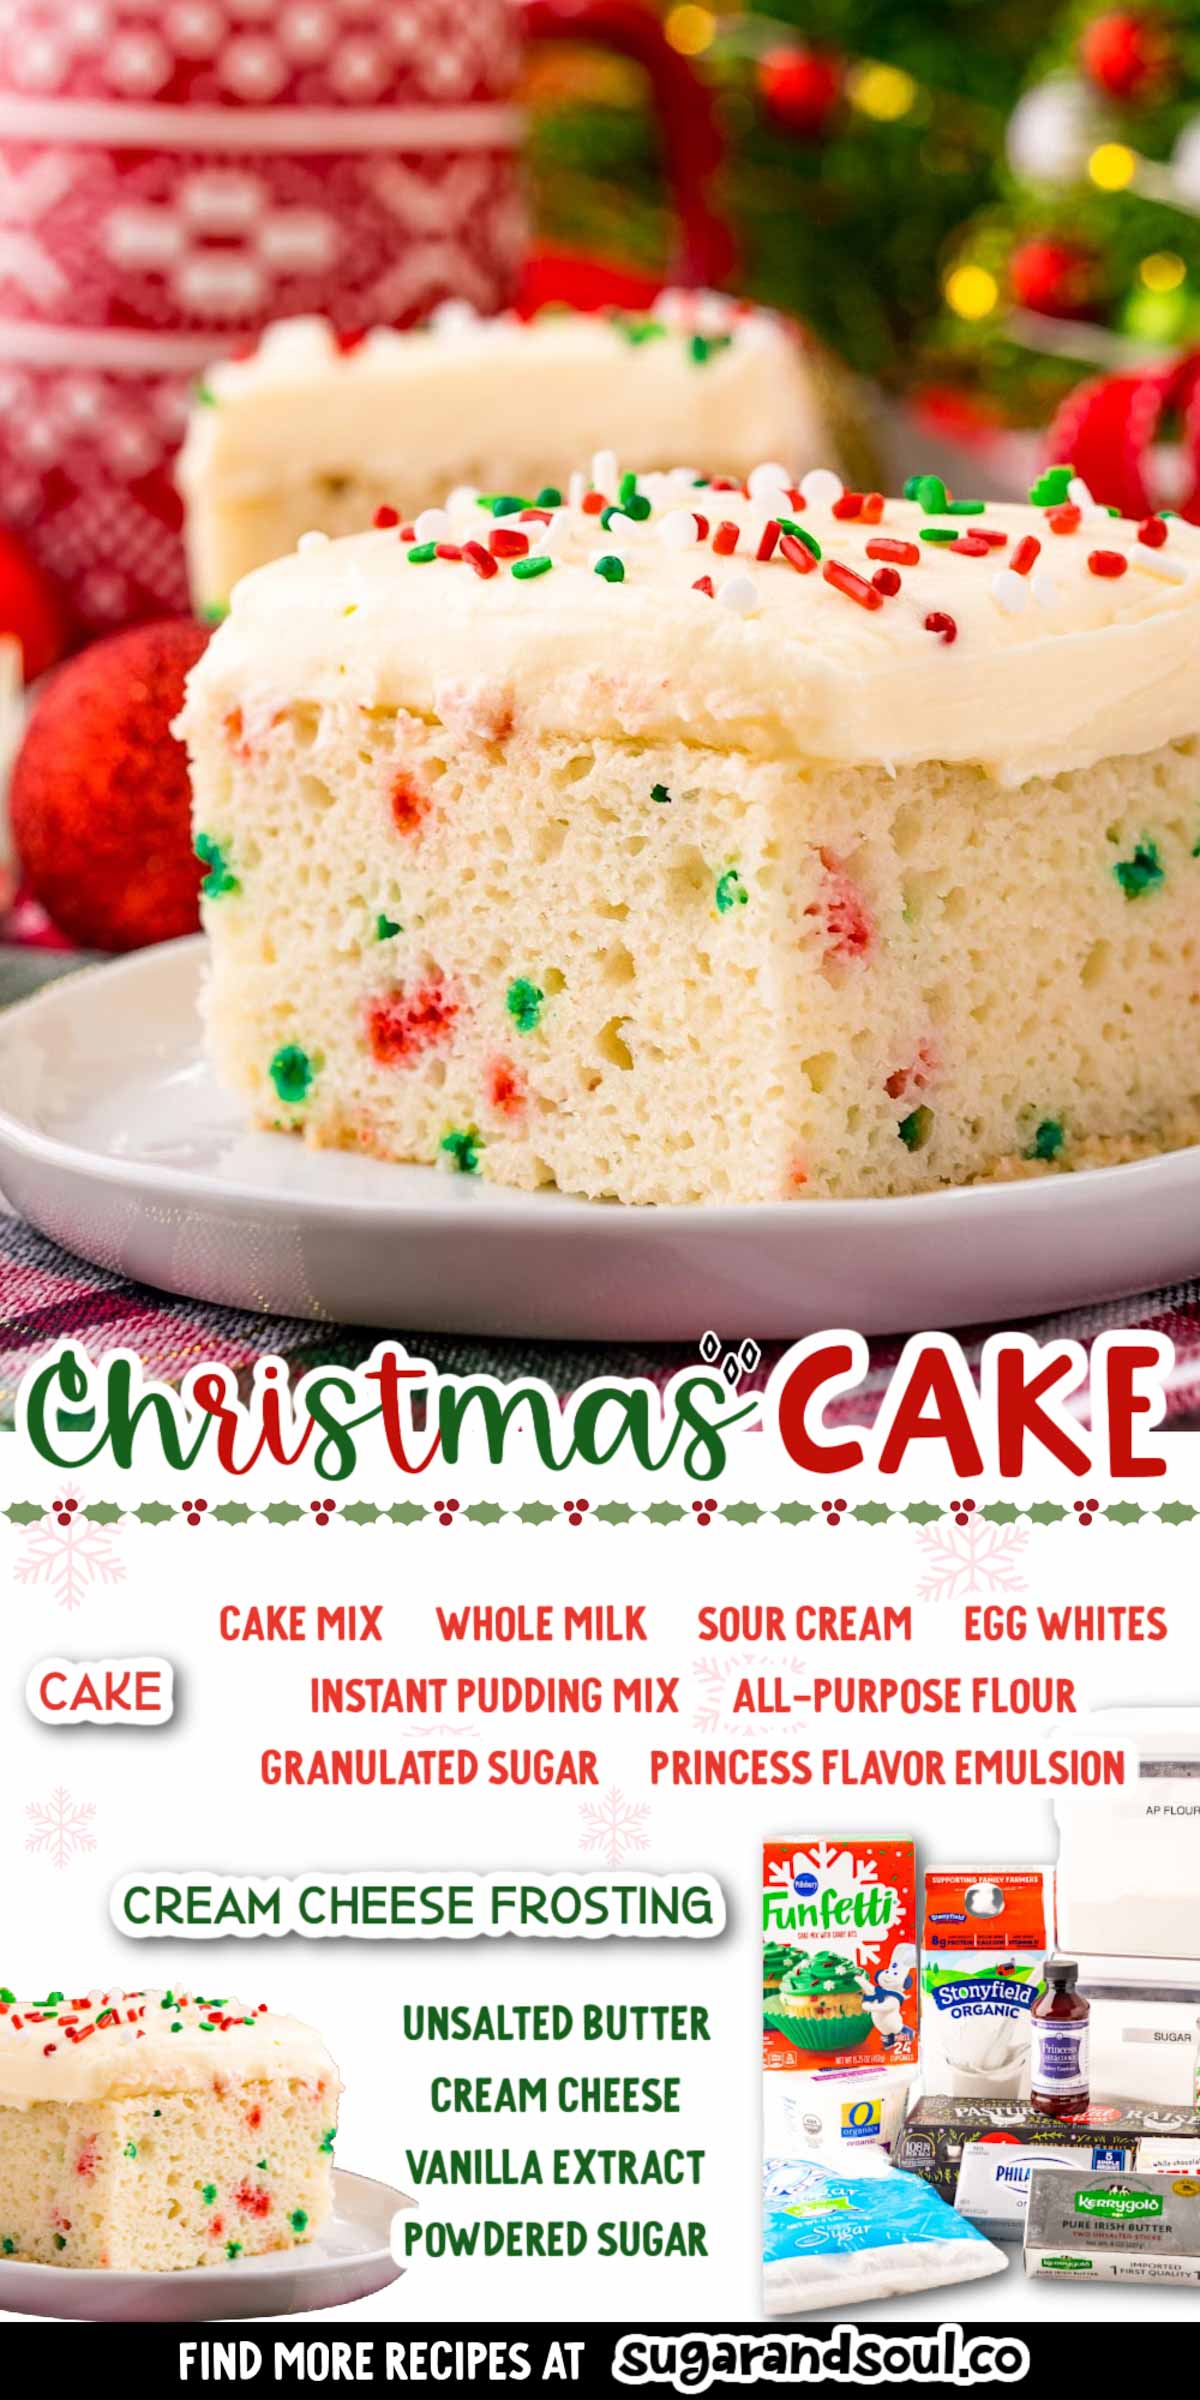 Christmas Cake is a moist, white cake that's studded with red and green sprinkles and finished off with a vanilla cream cheese frosting! This festive dessert is perfect for serving up at large family gatherings! via @sugarandsoulco